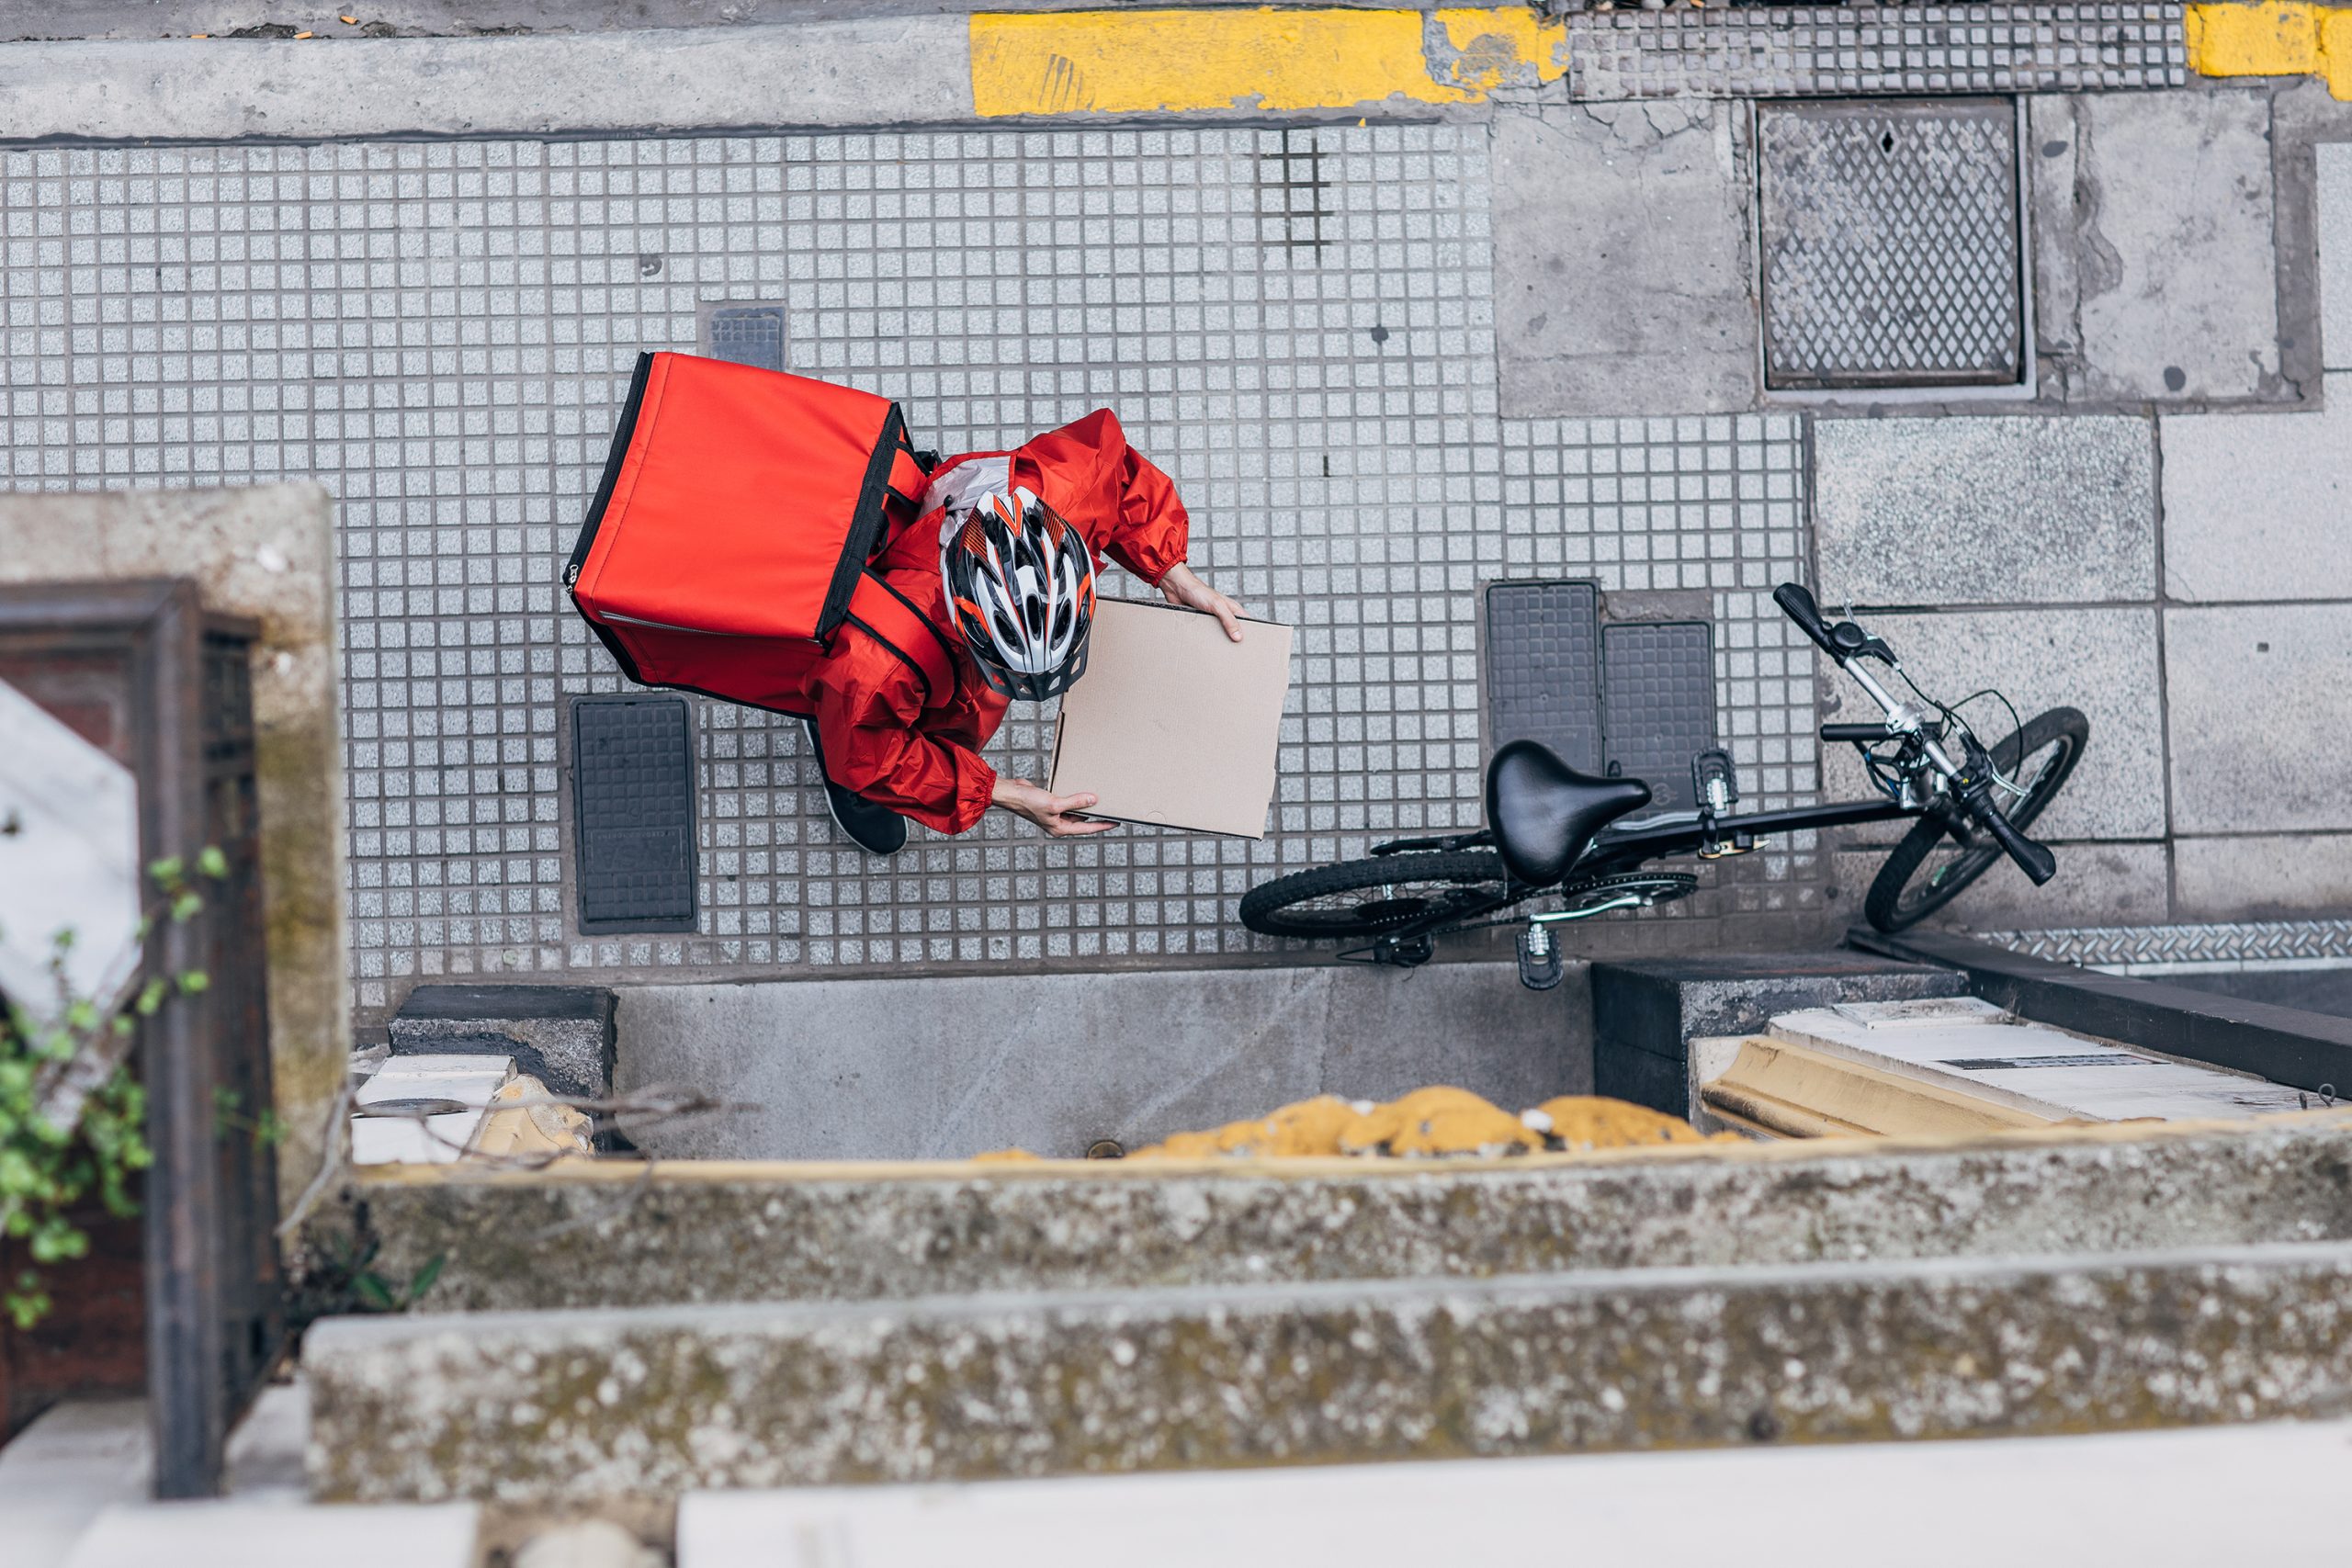 A view looking down from a building on a food delivery driver, who wears a red jacket and carries a red delivery pack on his back. Next to him at the entrance to a building is his bicycle.